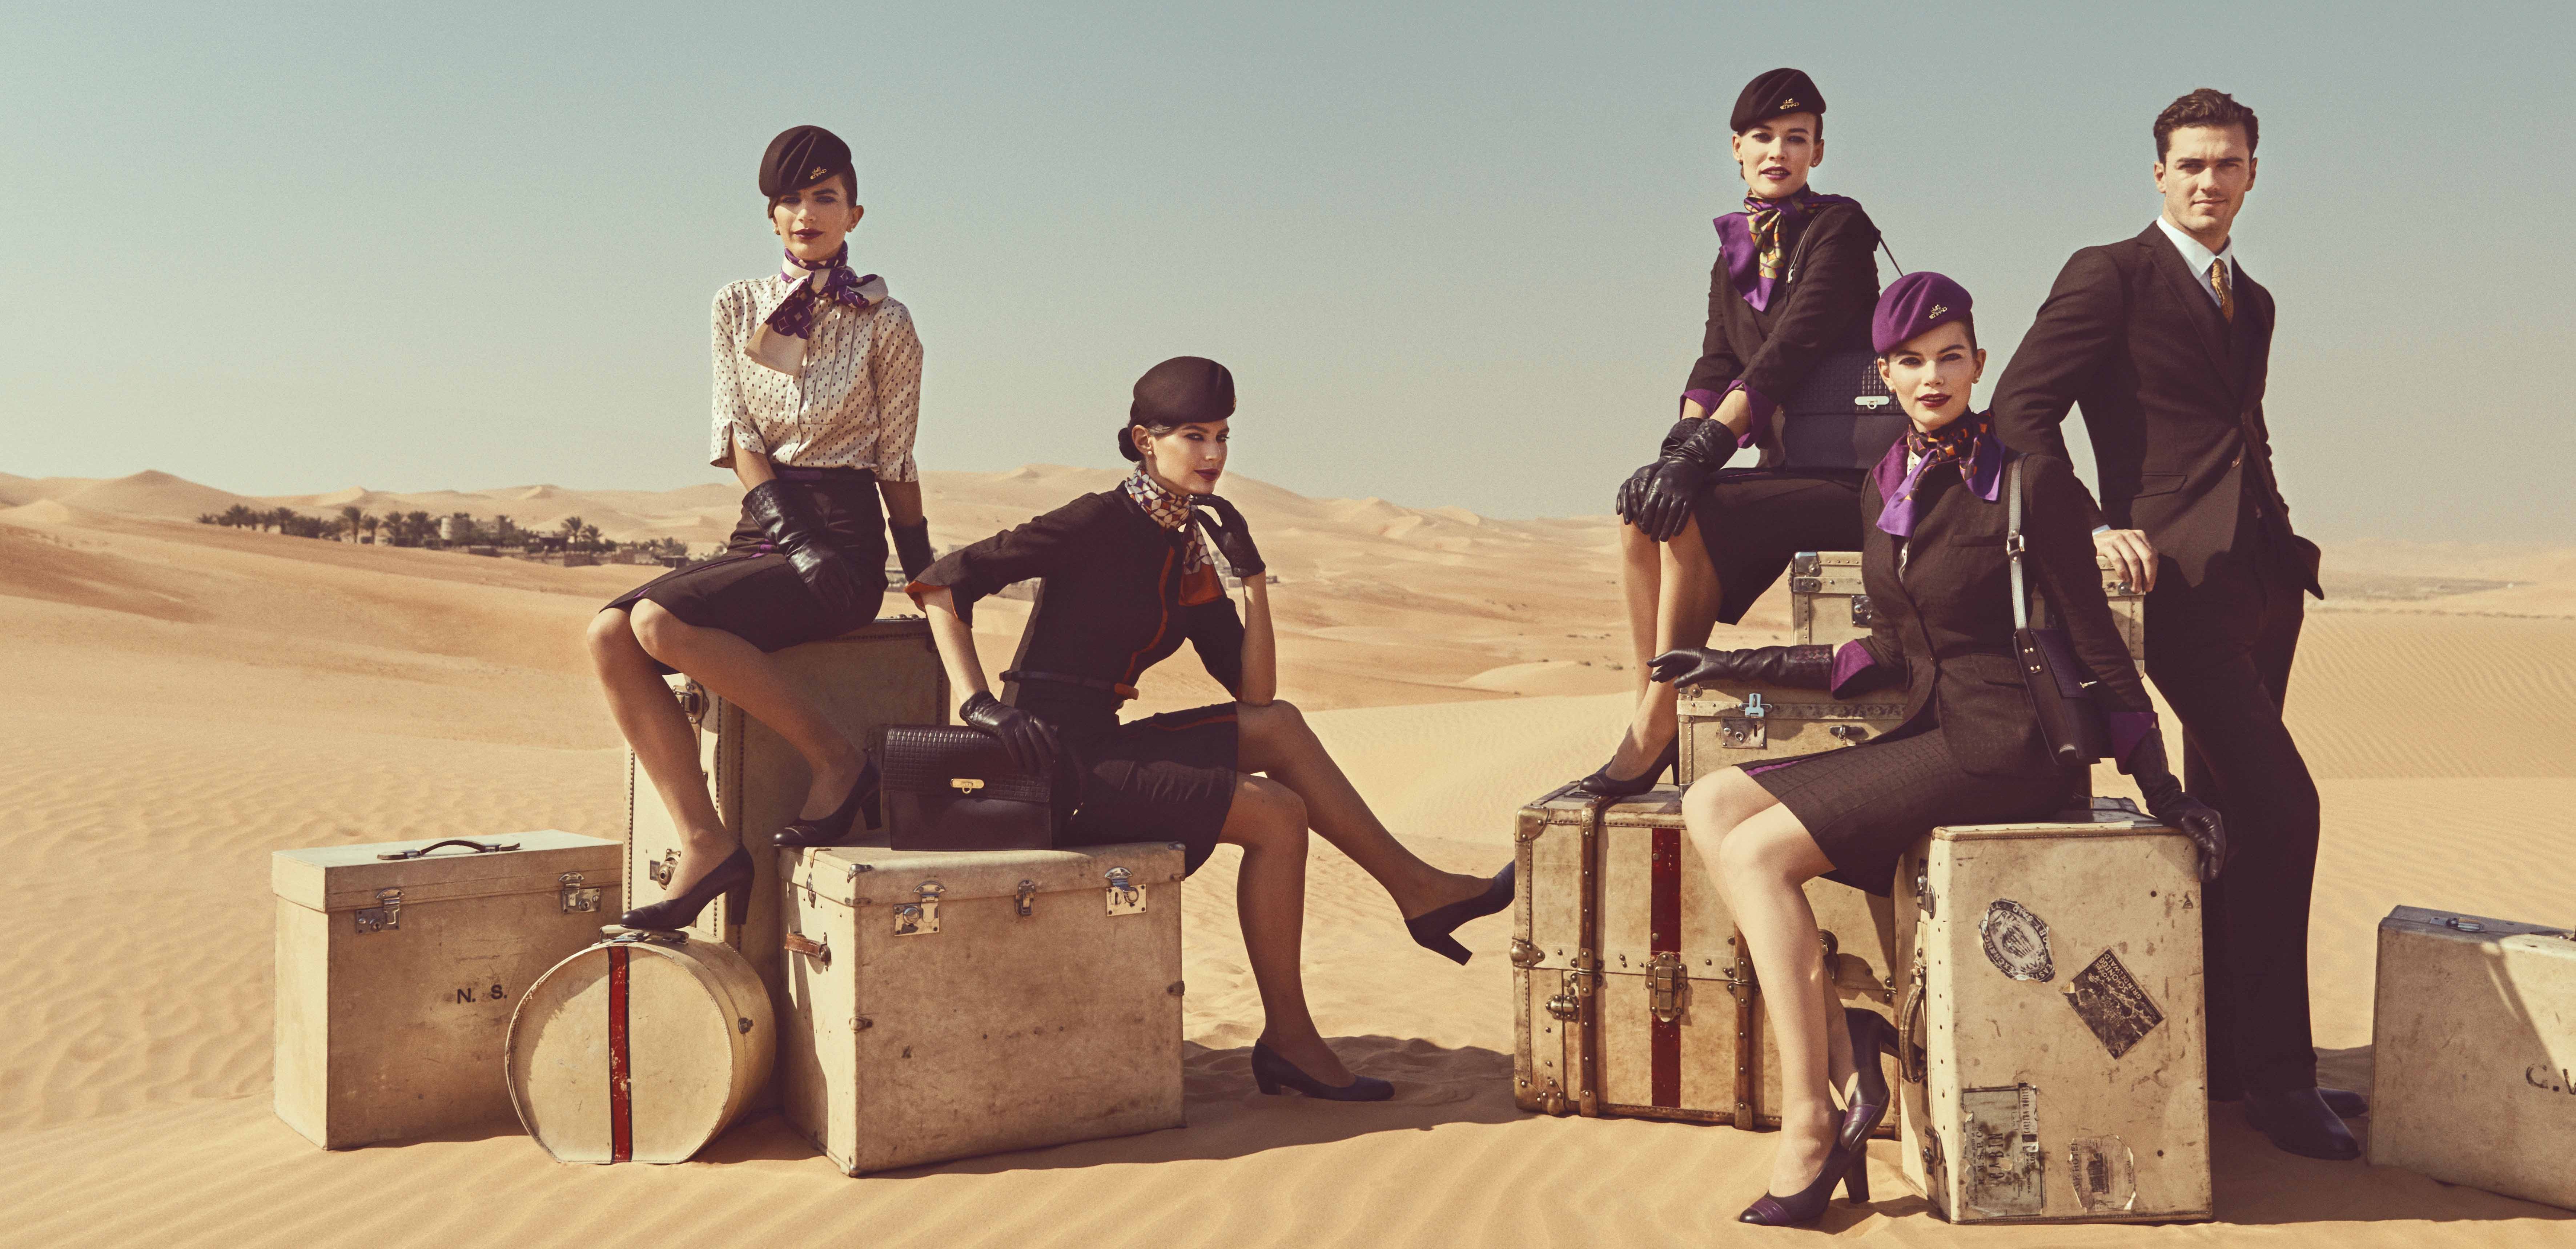 The new Etihad Airways uniform and livery - part of its Flying Reimagined campaign